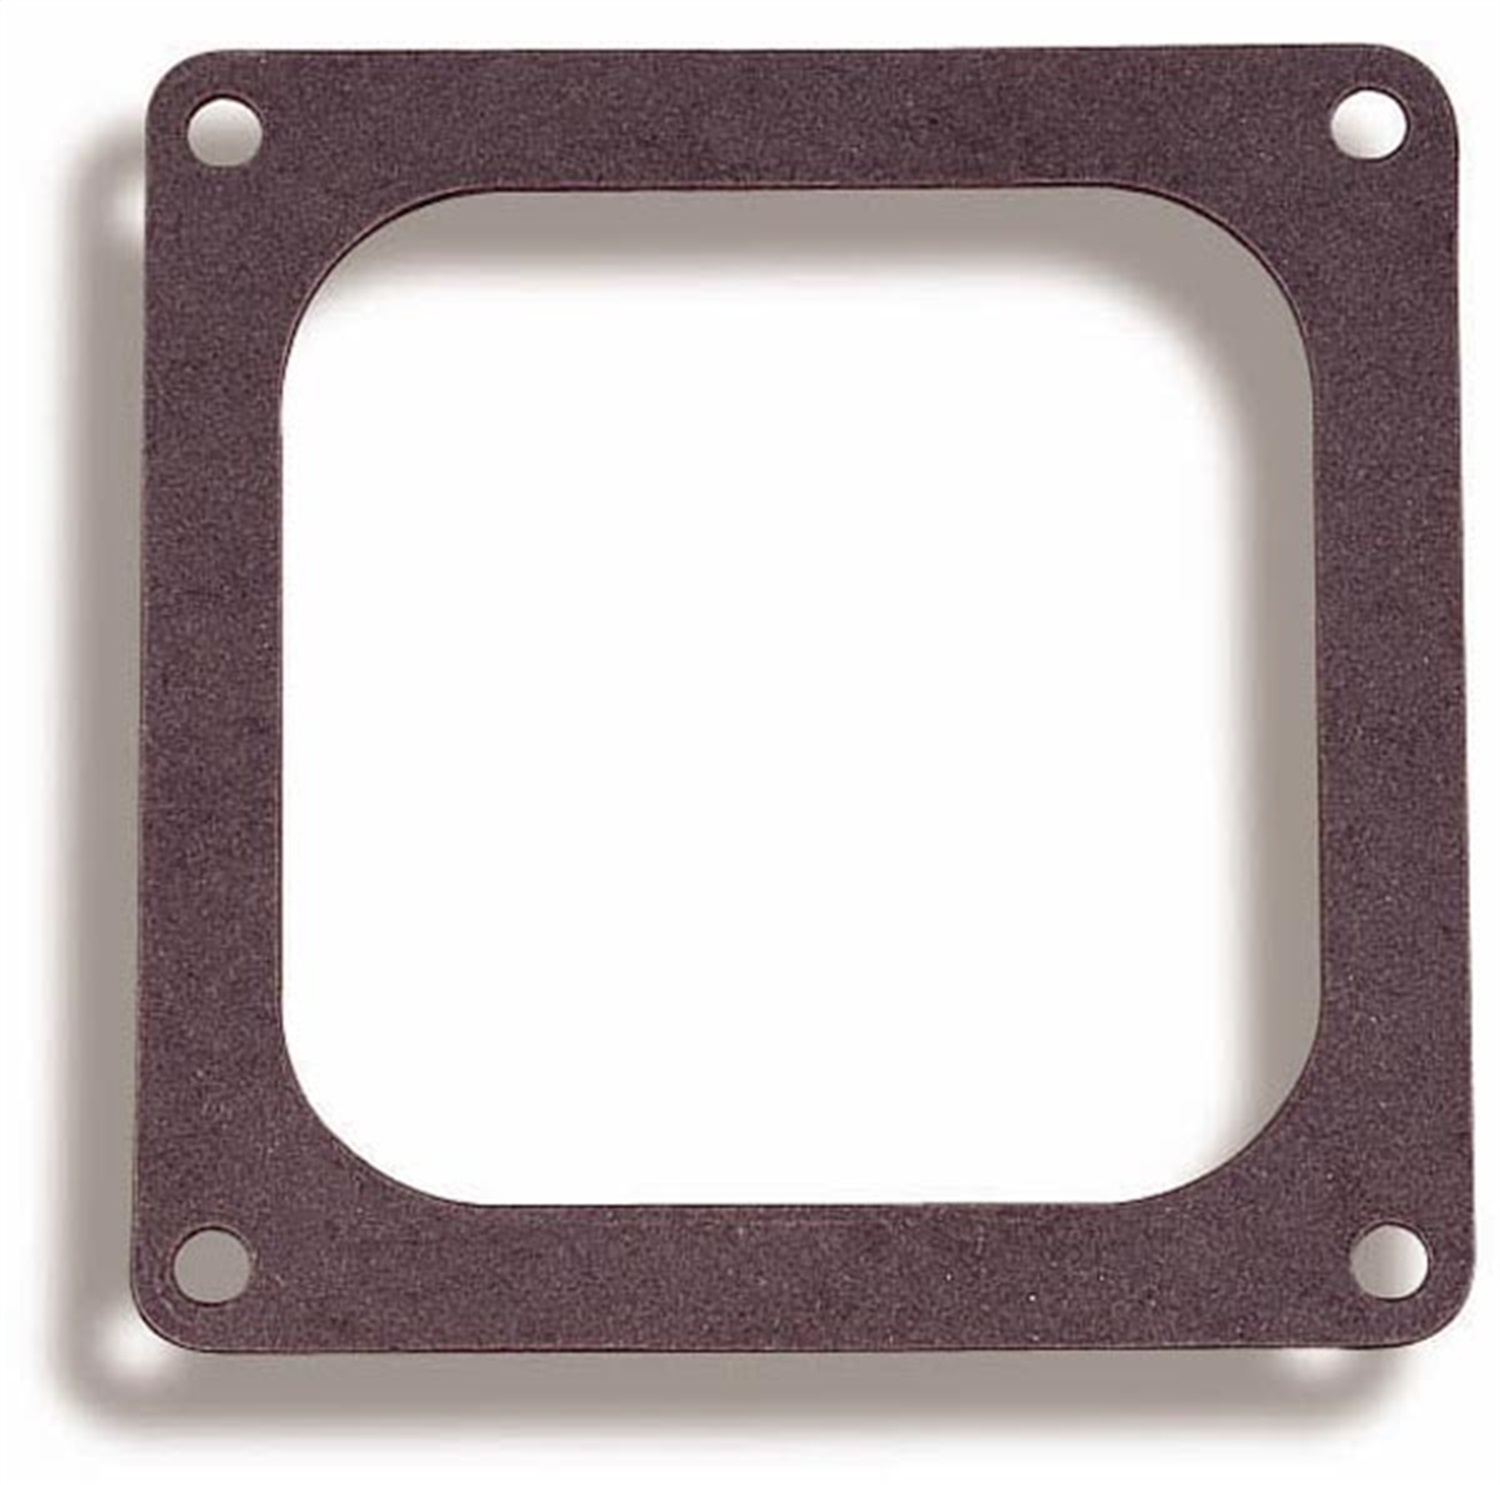 Holley Performance Holley Performance 108-84-2 Base Gasket